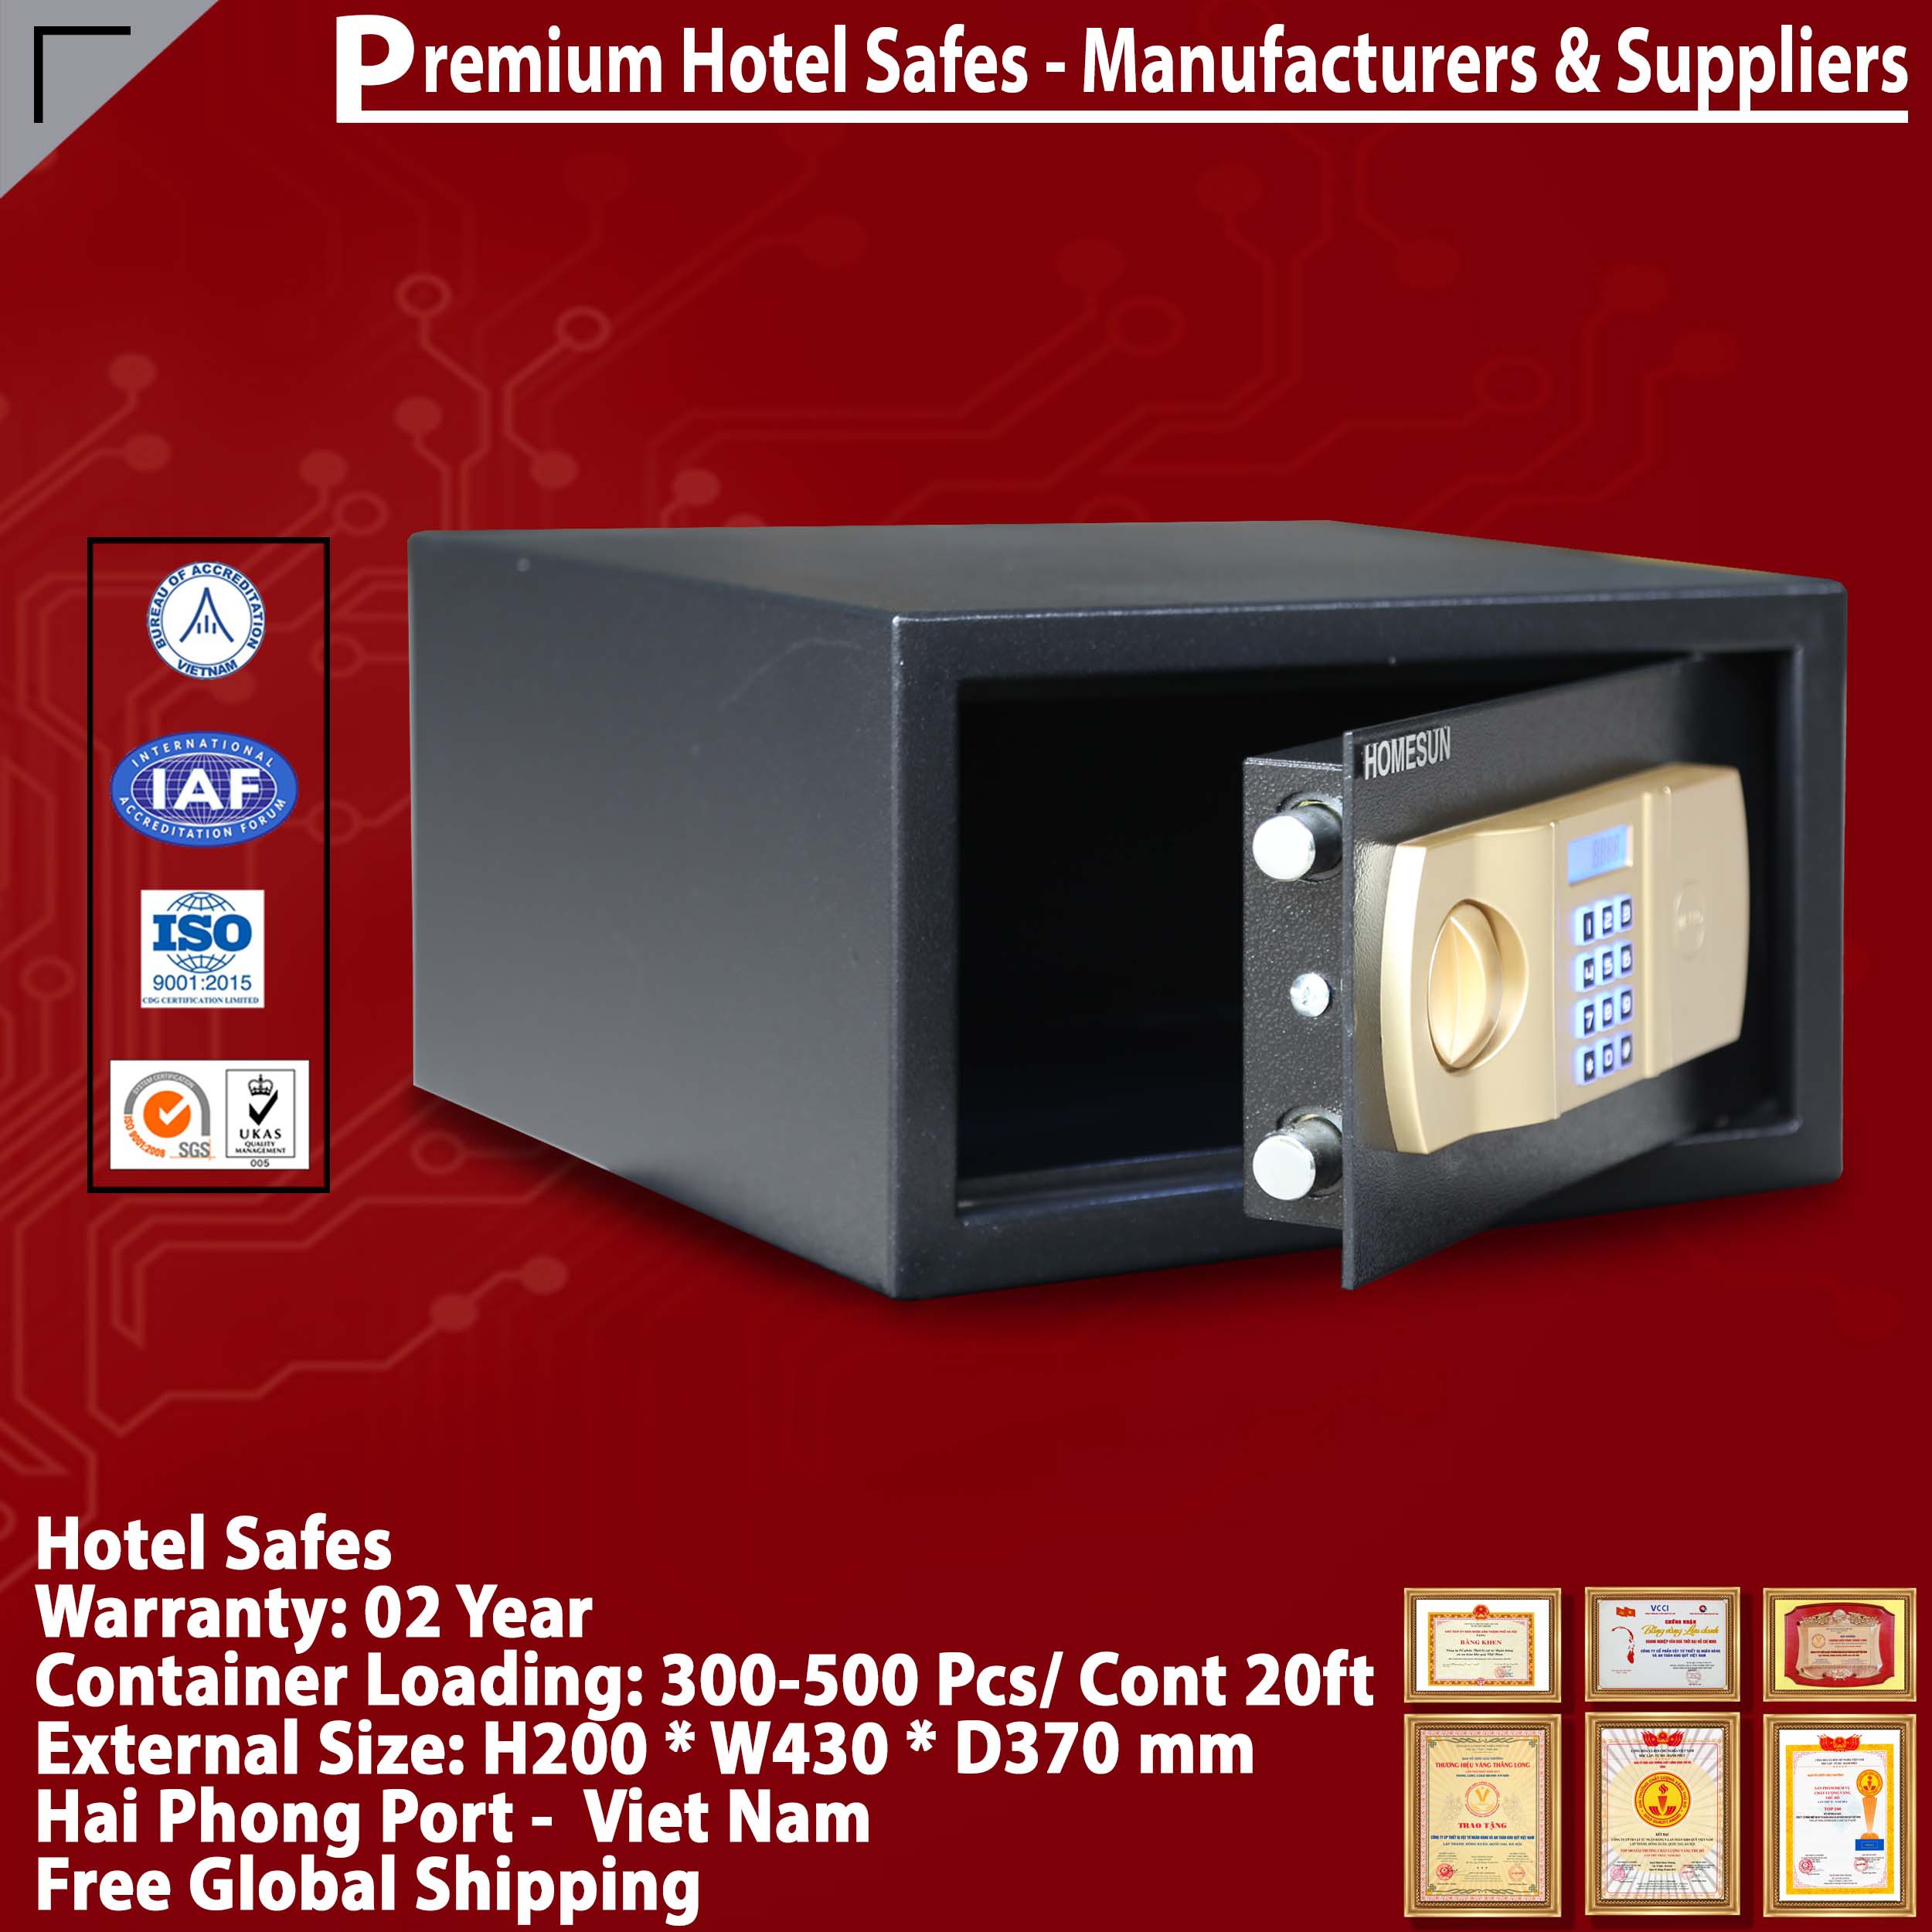 Hotel Room Security High Quality Price Ratio‎